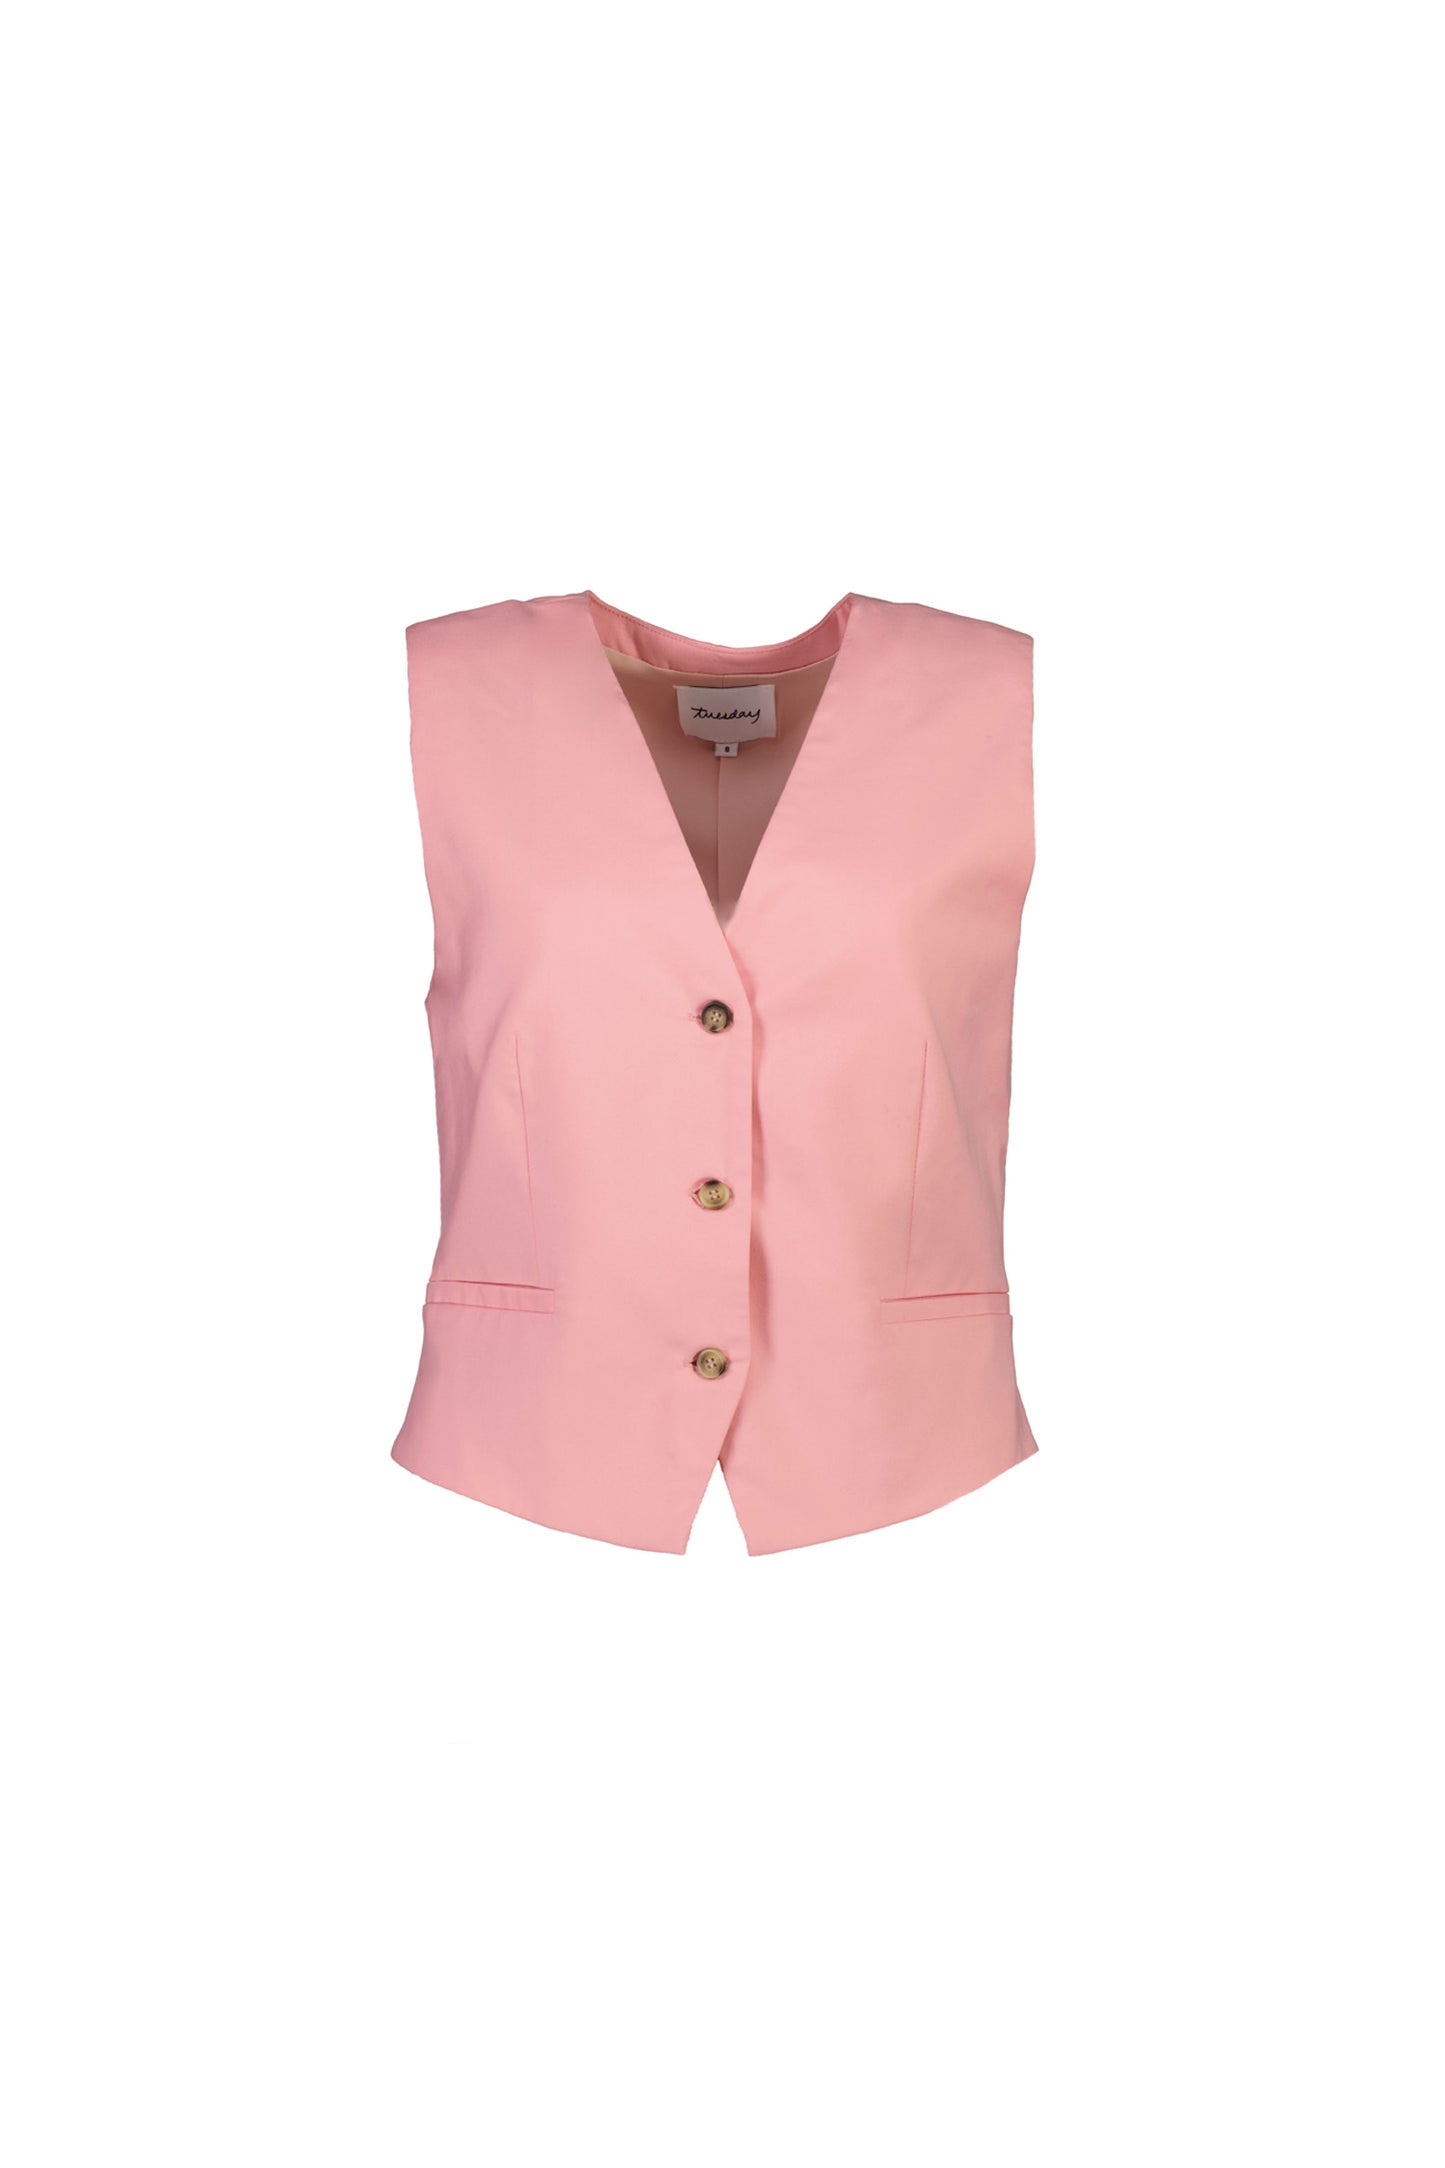 Tuesday Place Vest | Pink Suiting